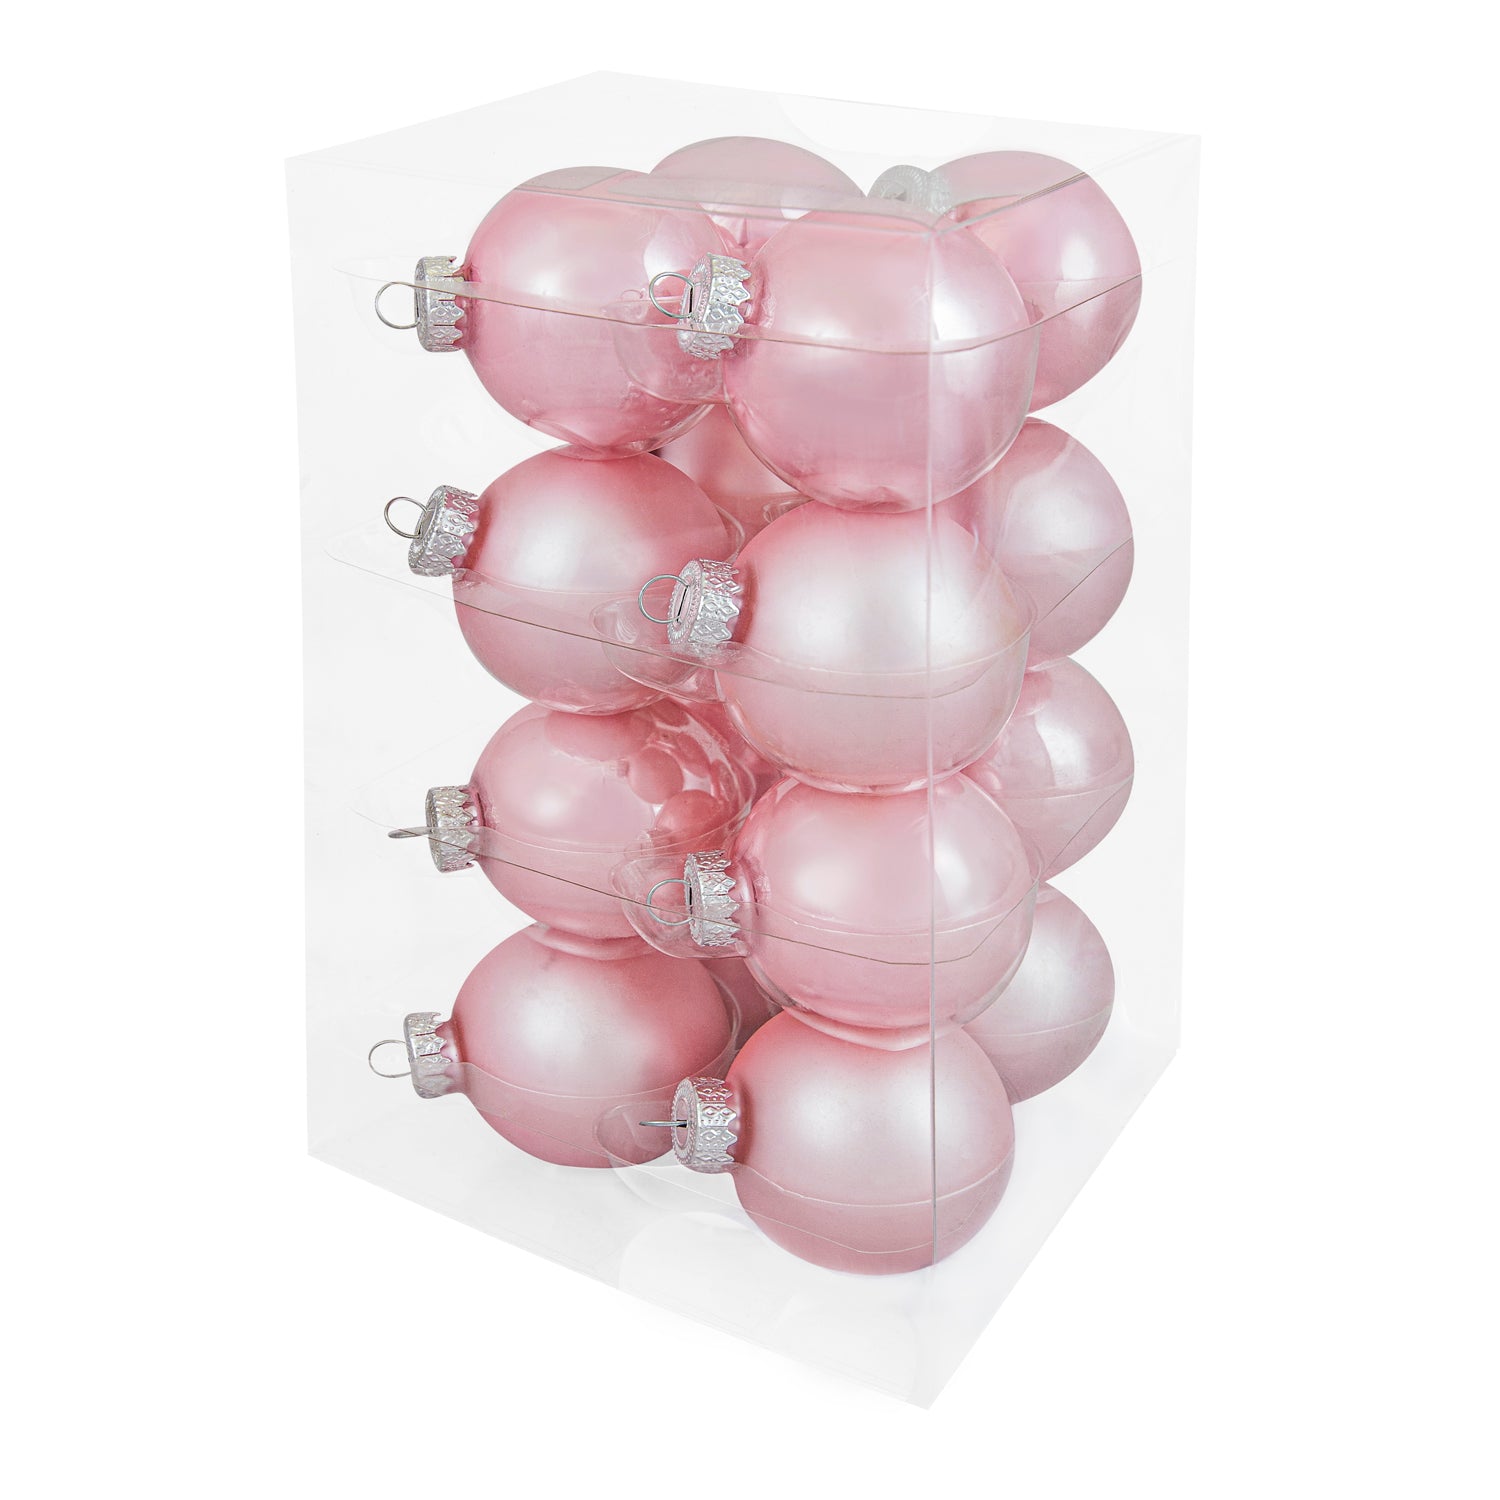 Decosy® Powder Pink Christmas Baubles Glass 48 pieces - 32x 60mm and 16x 80mm